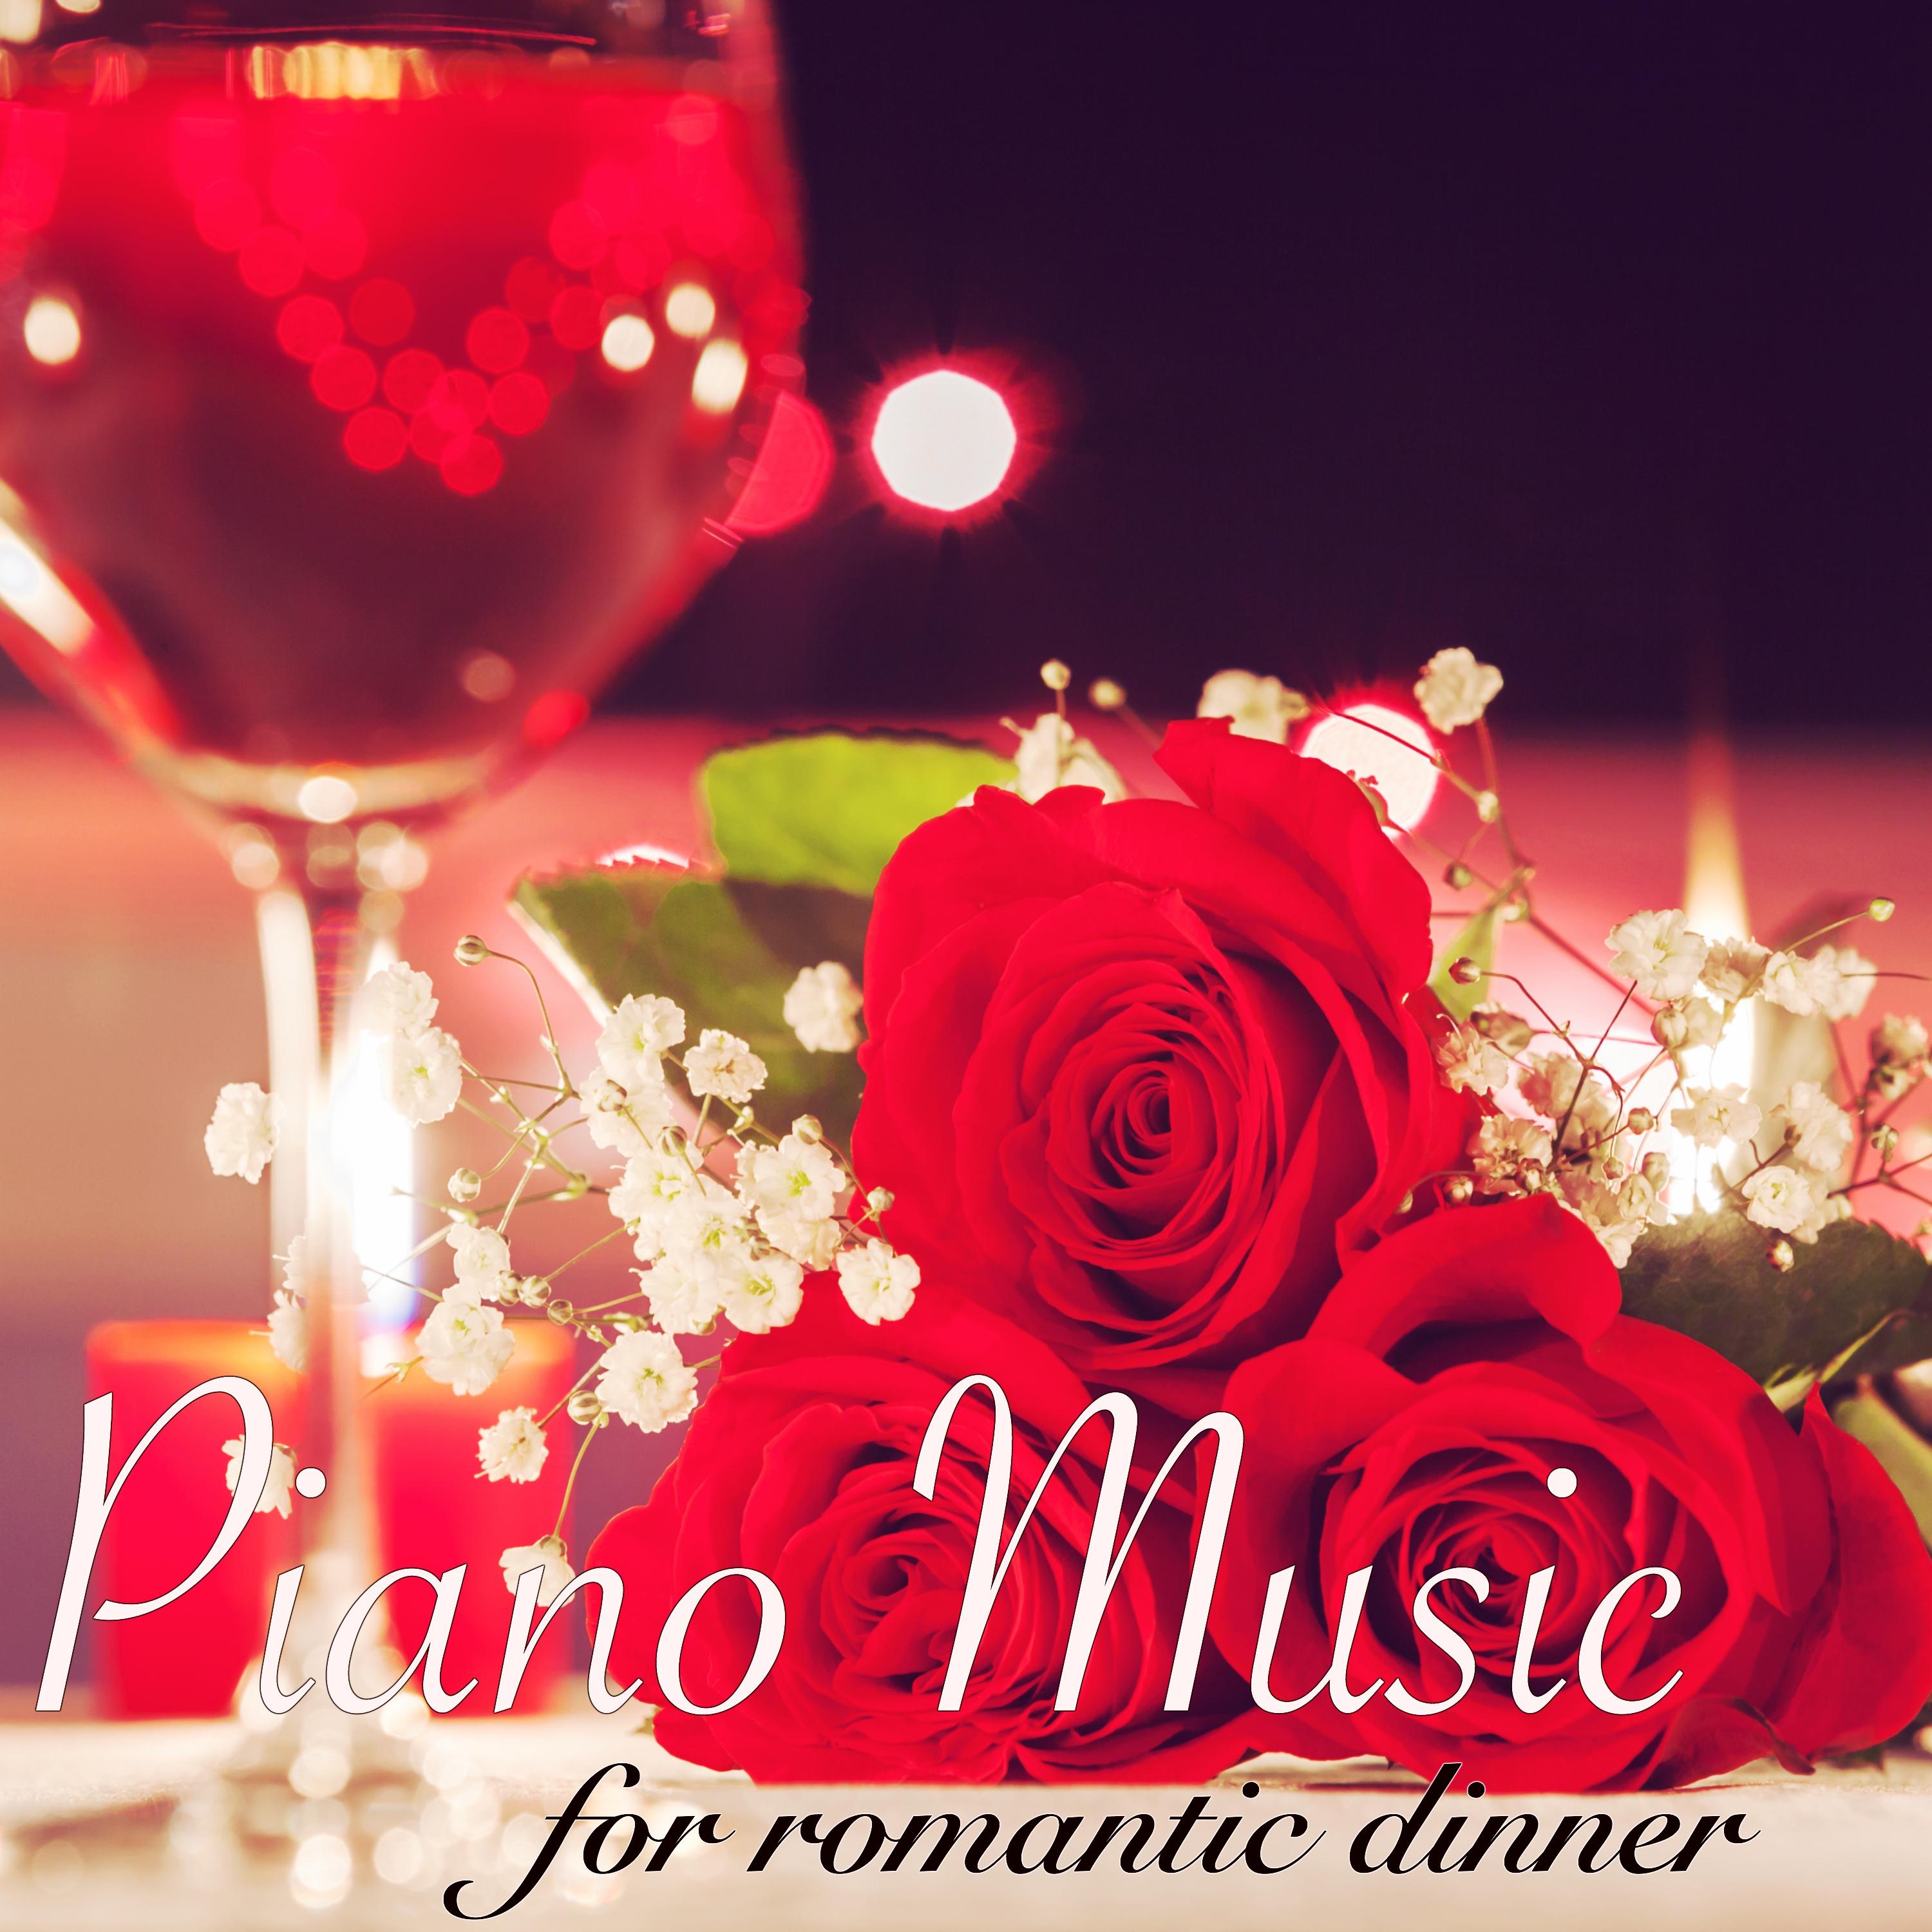 Piano Music for Romantic Dinner  Restaurant Dinner Music or Perfect Background Piano Songs for Romantic and Elegant Dinner at Home